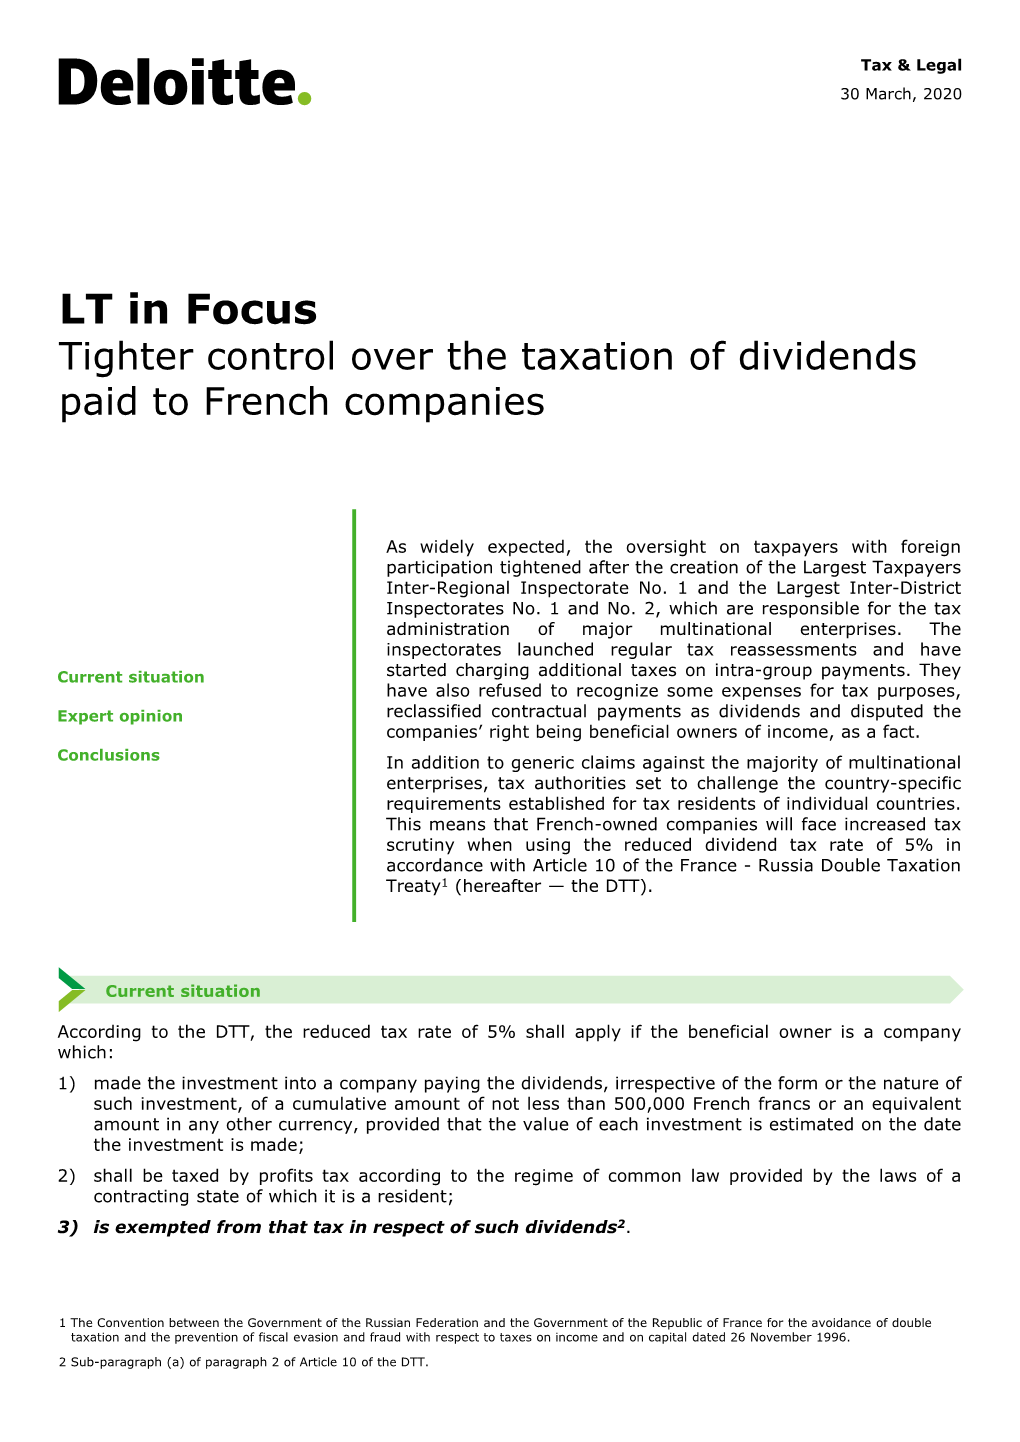 Tighter Control Over the Taxation of Dividends Paid to French Companies